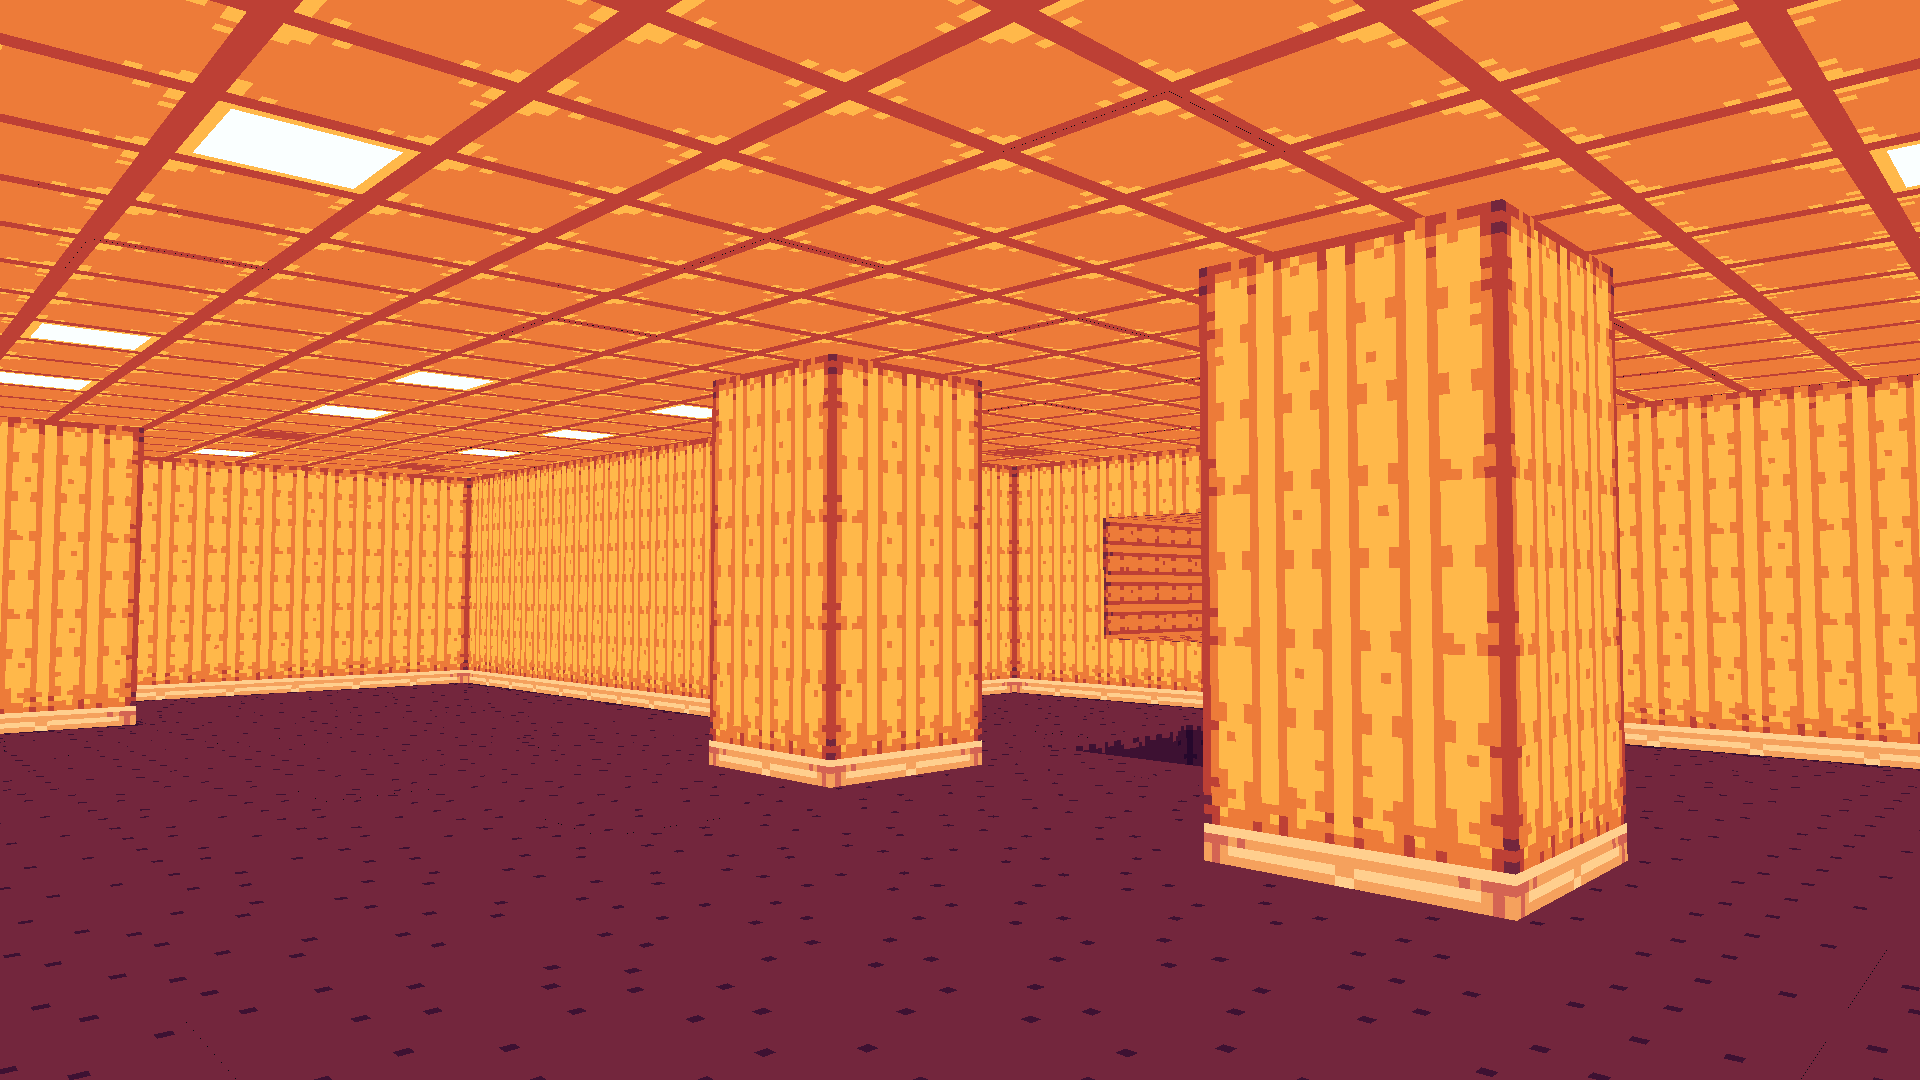 Tyko's Dying Together on itch.io #liminalspace #backrooms, Liminal Spaces